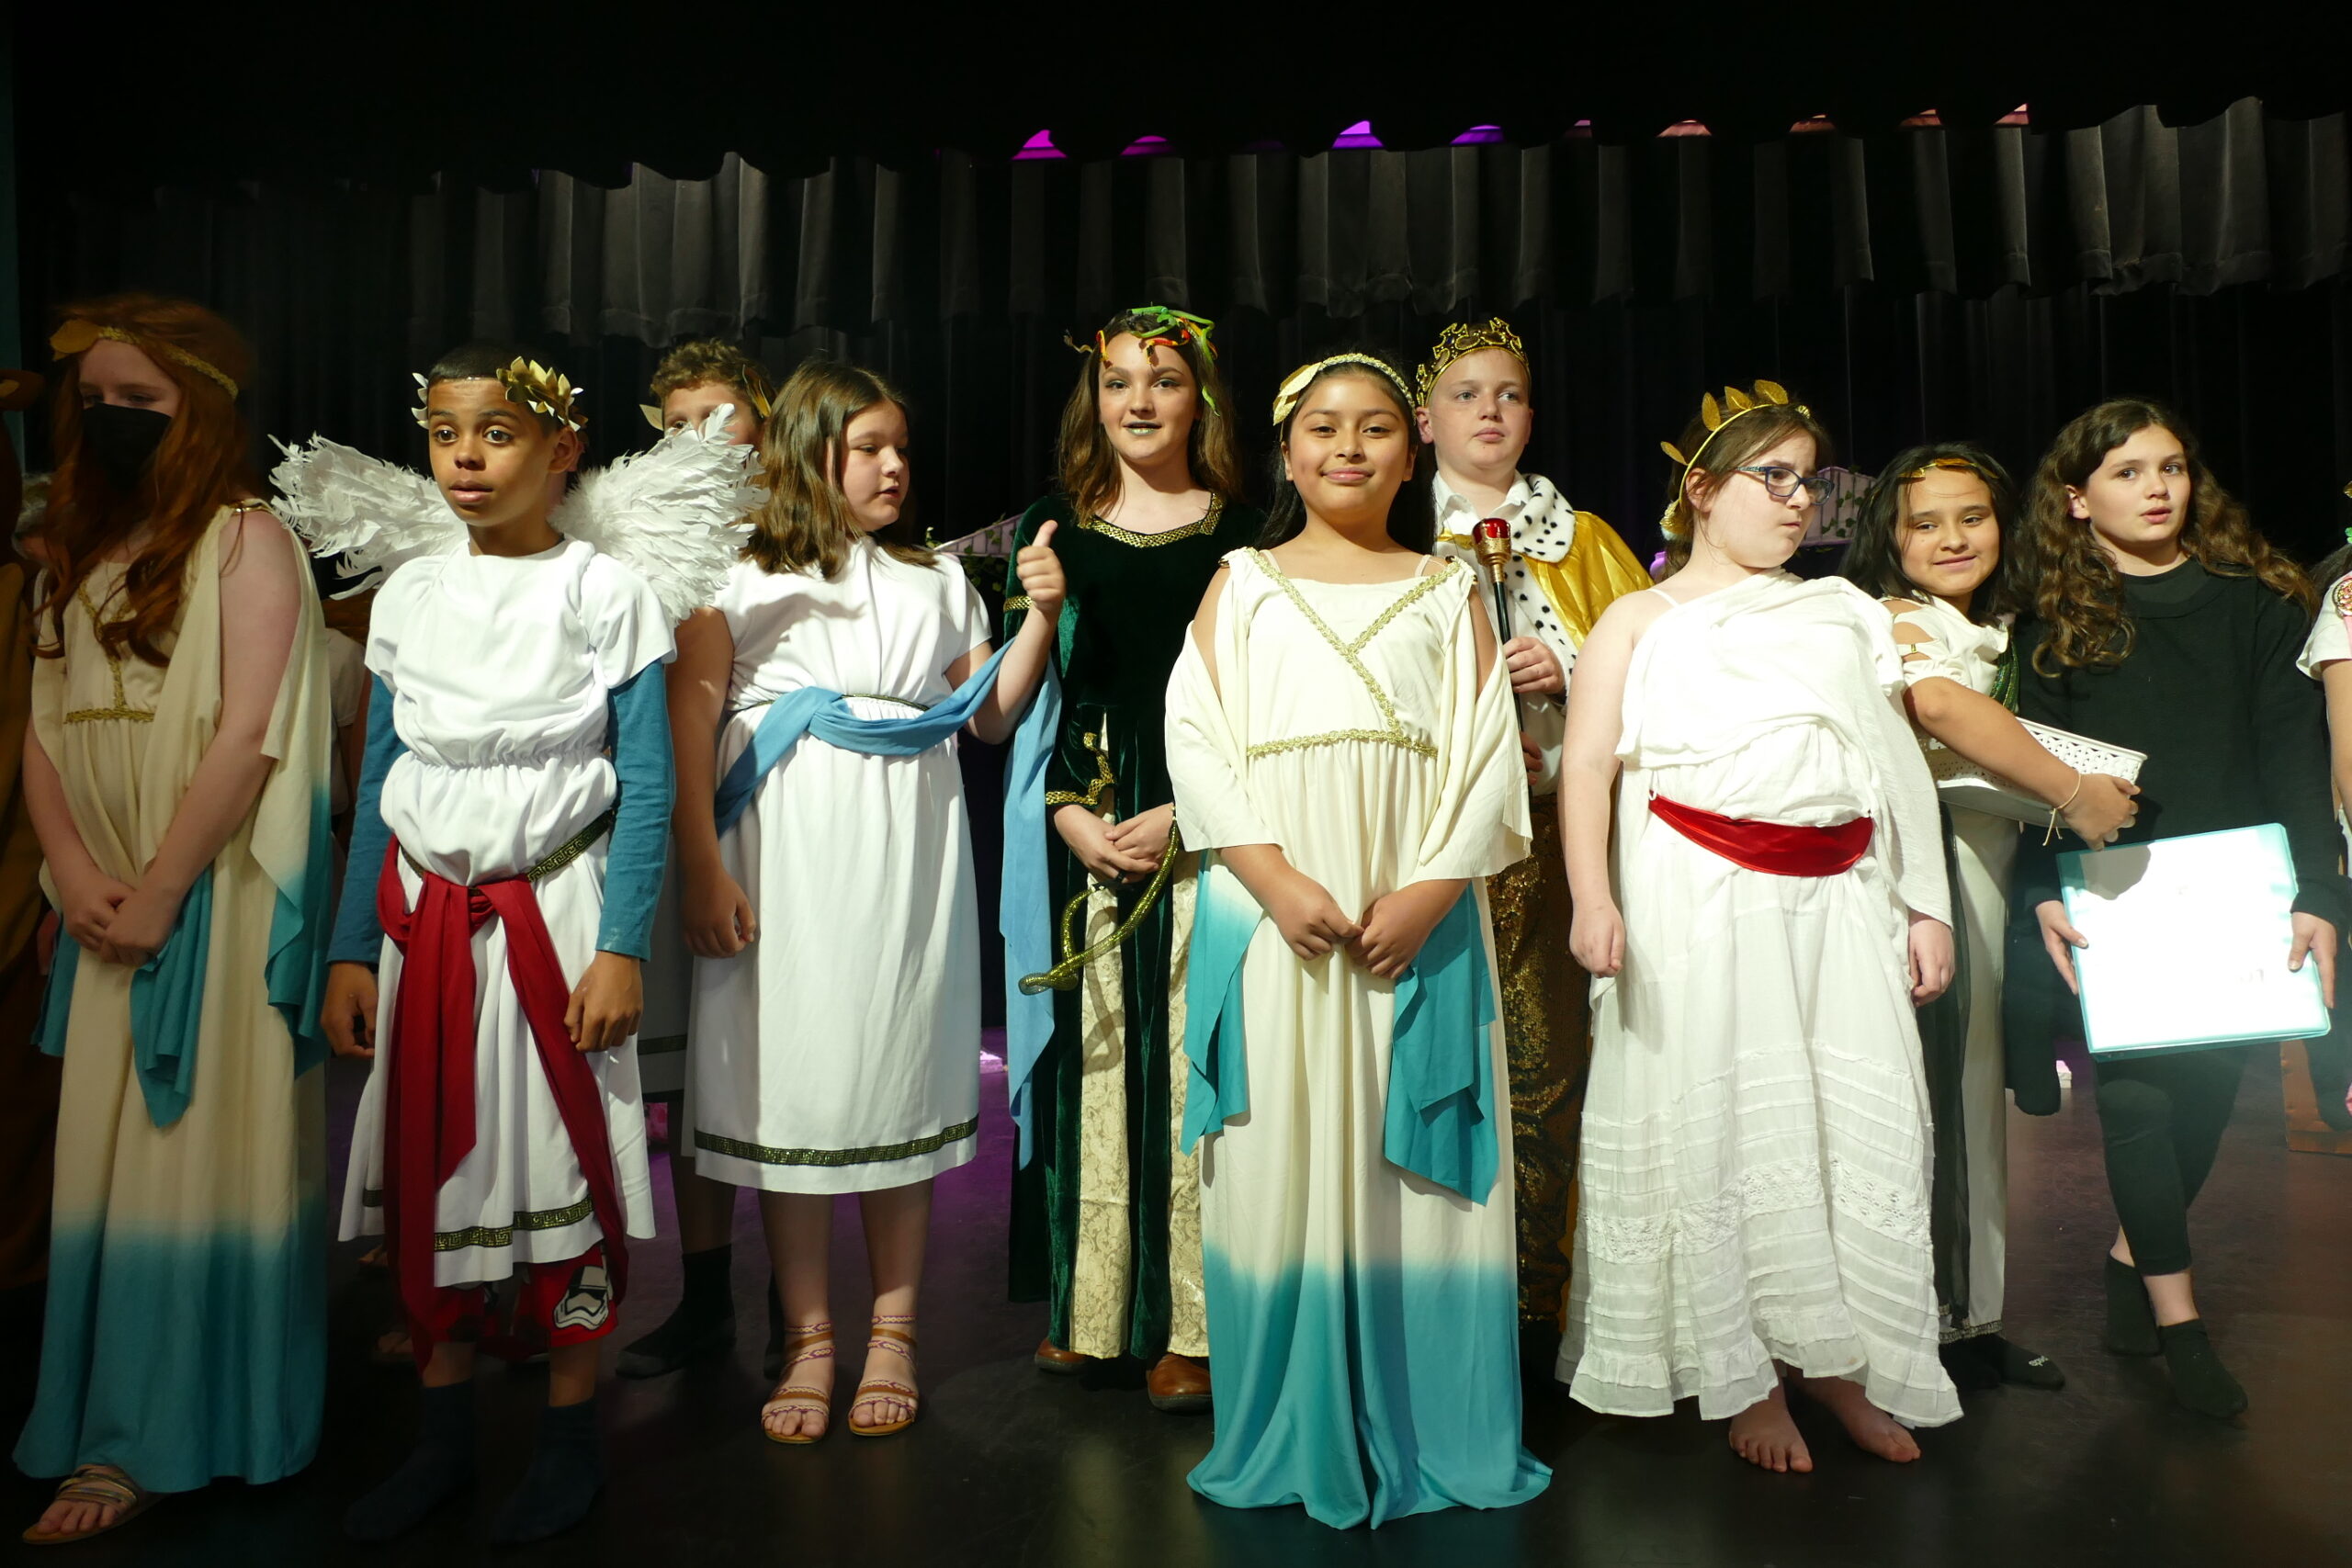 Students in Claire Zaneski's fifth grade class at Our Lady of the Hamptons School presented the final
assembly of the year with their production of “Pandora’s Sox”, a spoof on ancient and medieval cultures and myths. COURTESY OUR LADY OF THE HAMPTONS SCHOOL